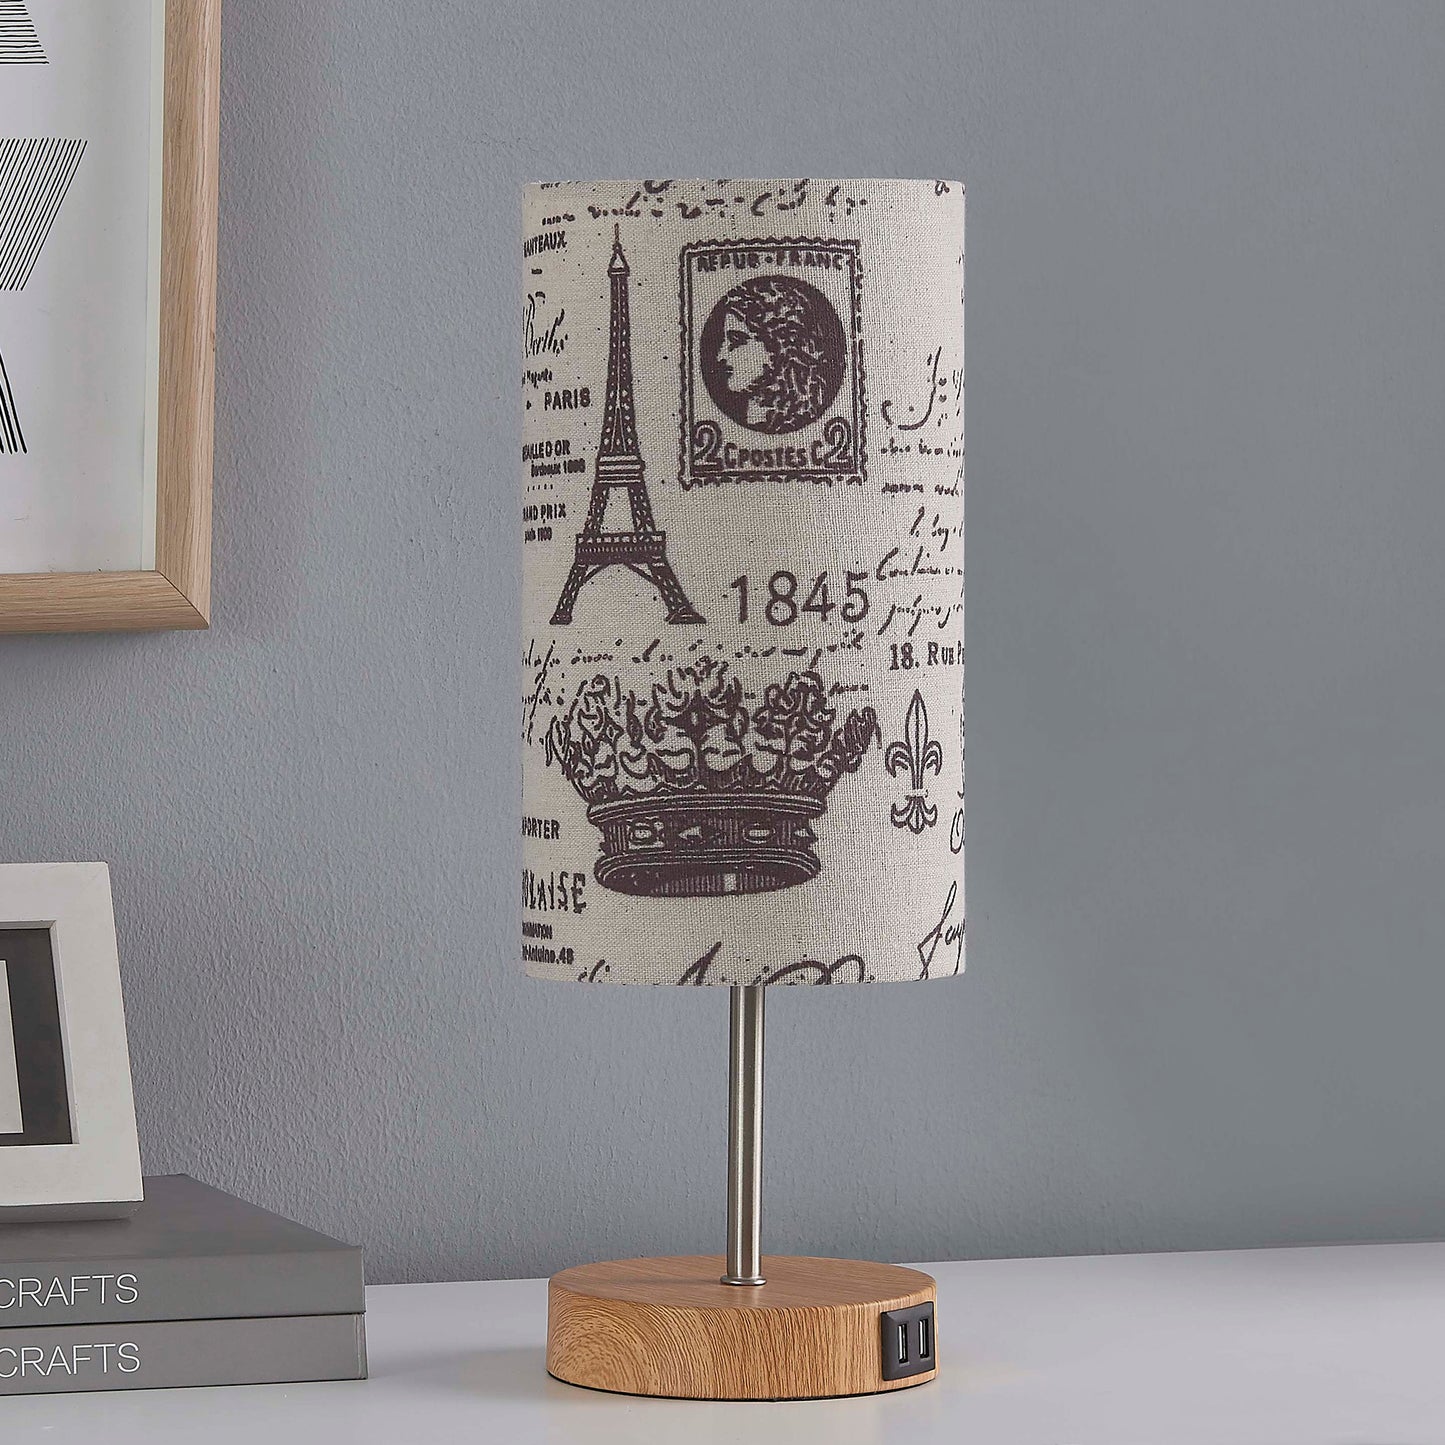 Table Lamps Feature Touch Dimming, USB Charging, and Exquisite Design